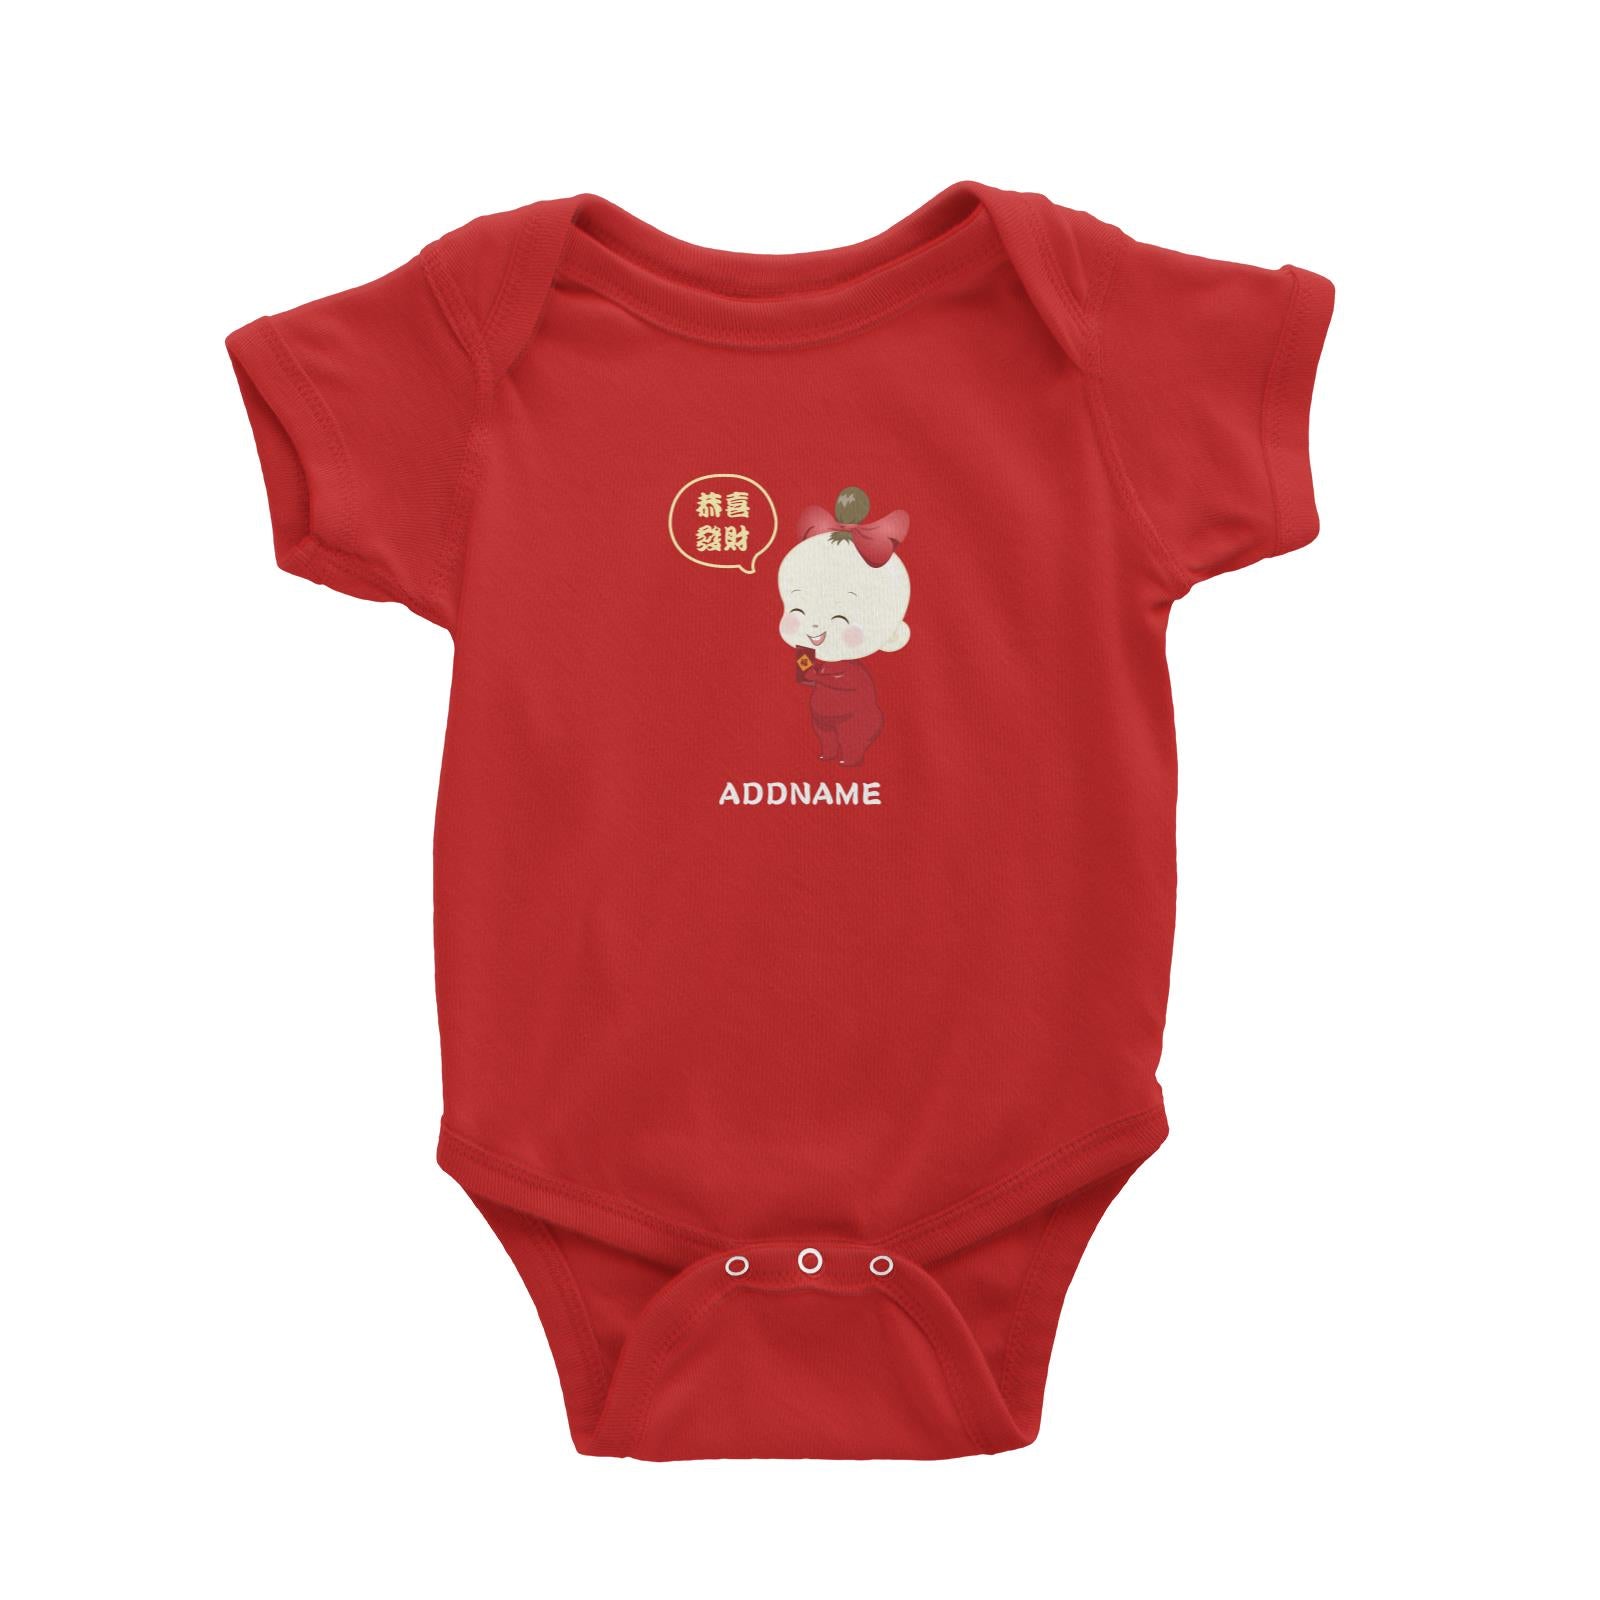 Chinese New Year Family Gong Xi Fai Cai Baby Girl Addname Baby Romper